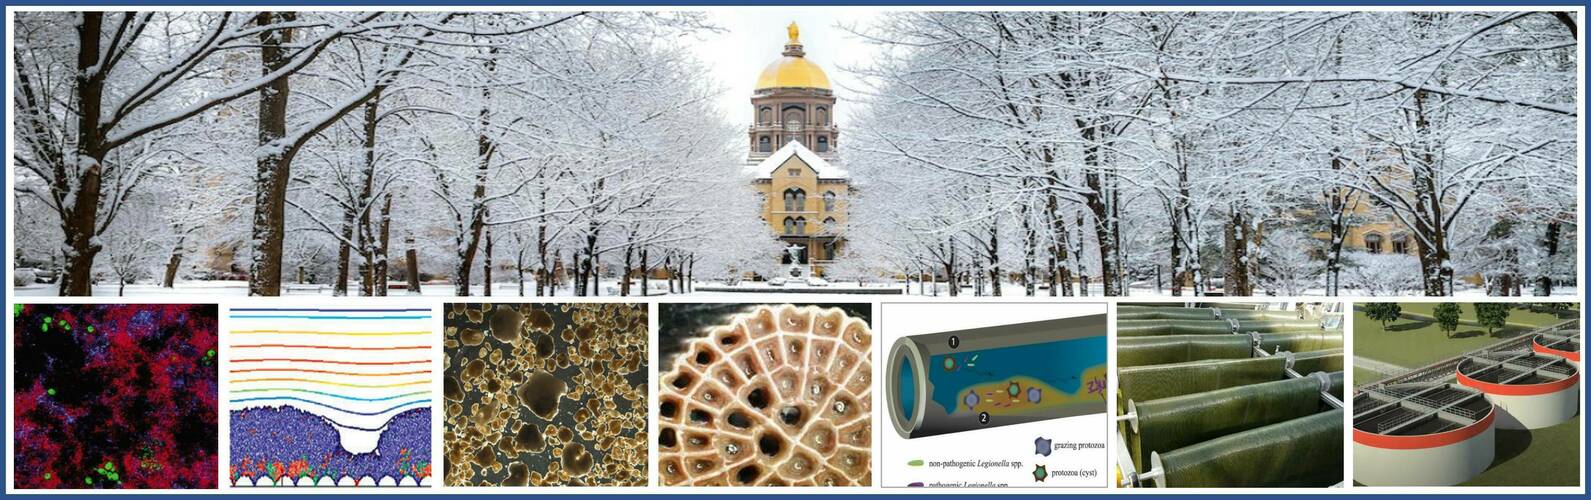 Collage including the golden dome and biofilm samples